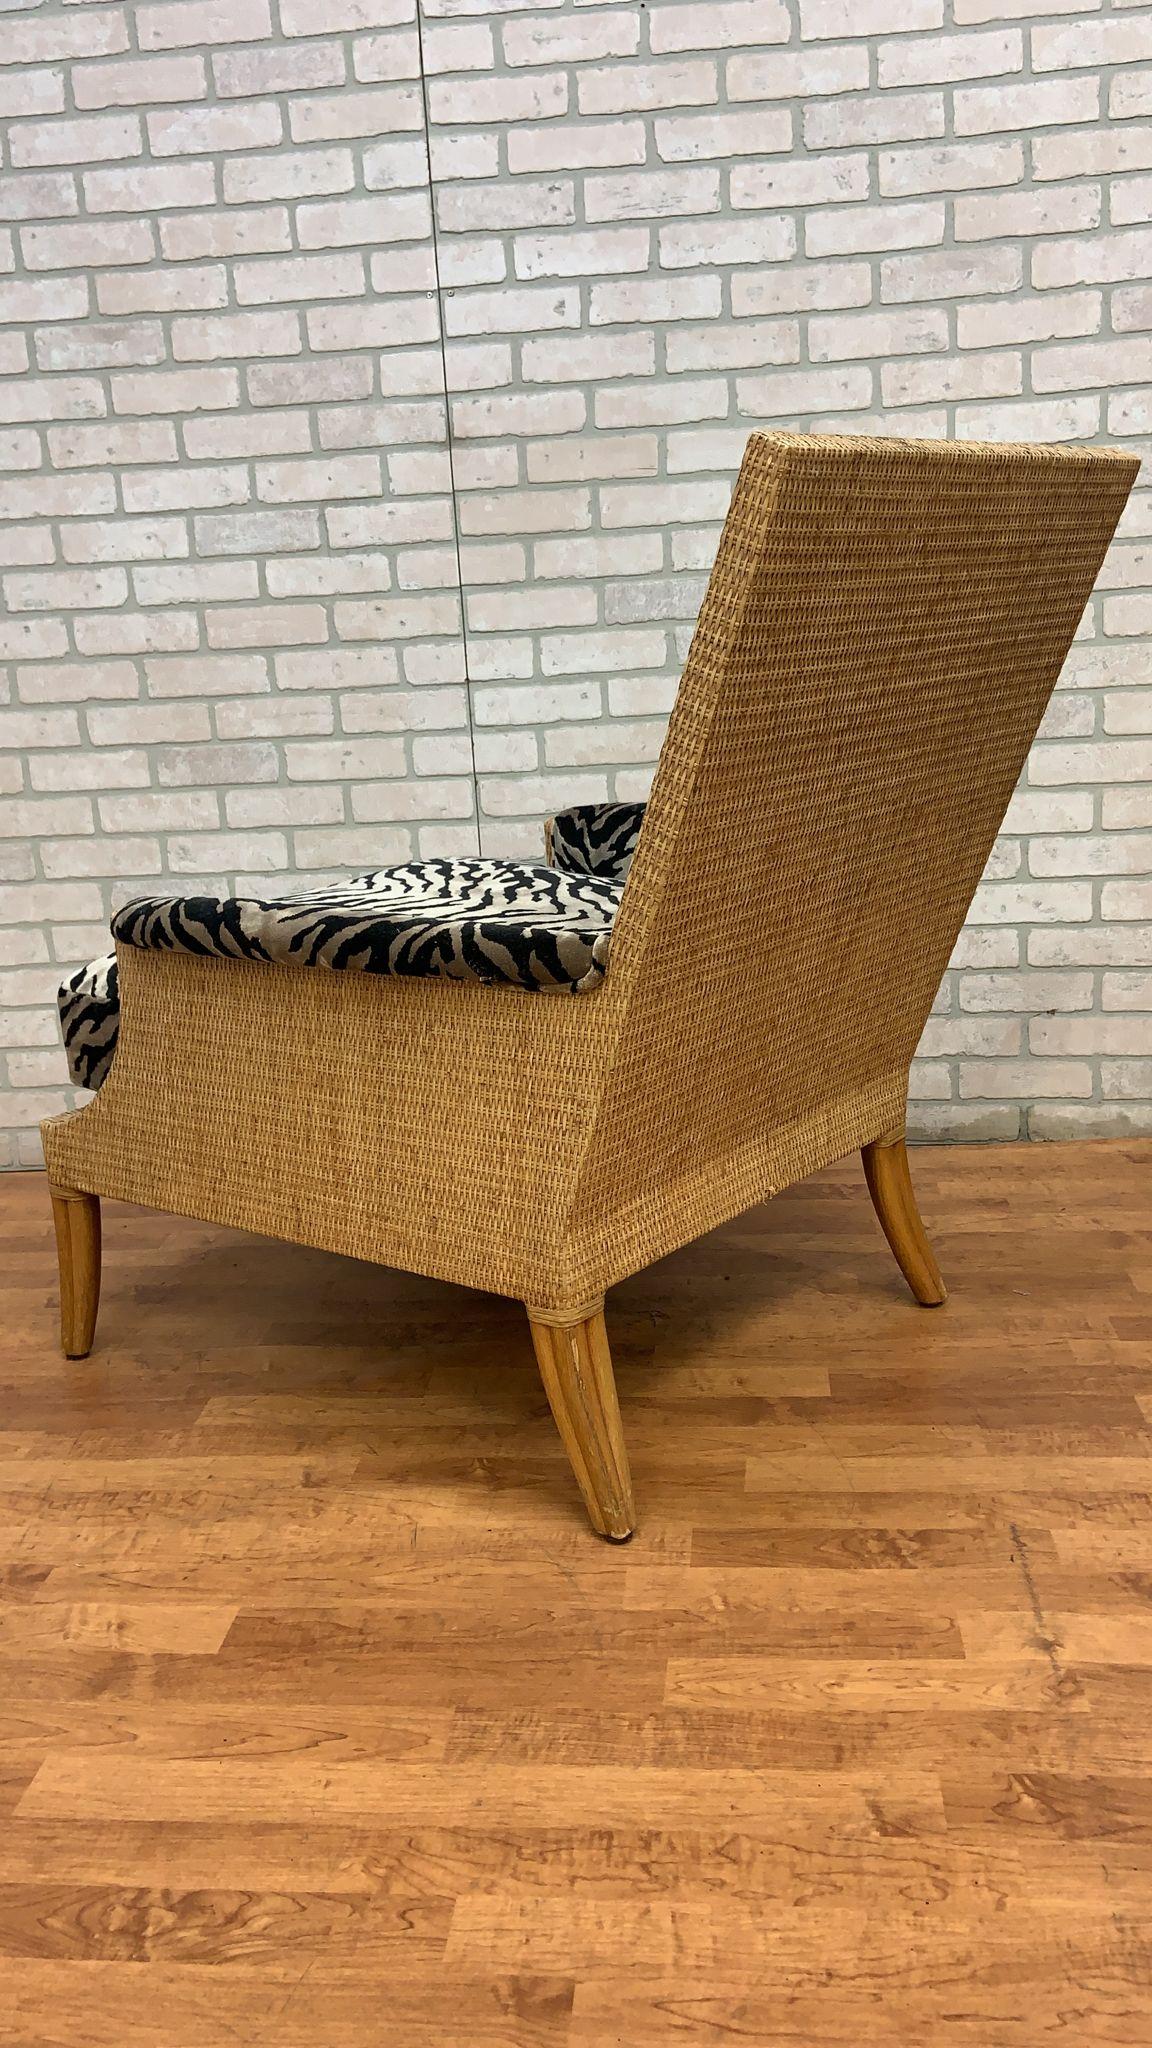 Vintage McGuire Rattan and Wicker Umbria Lounge Chair with Ottoman, 2 Piece Set For Sale 1